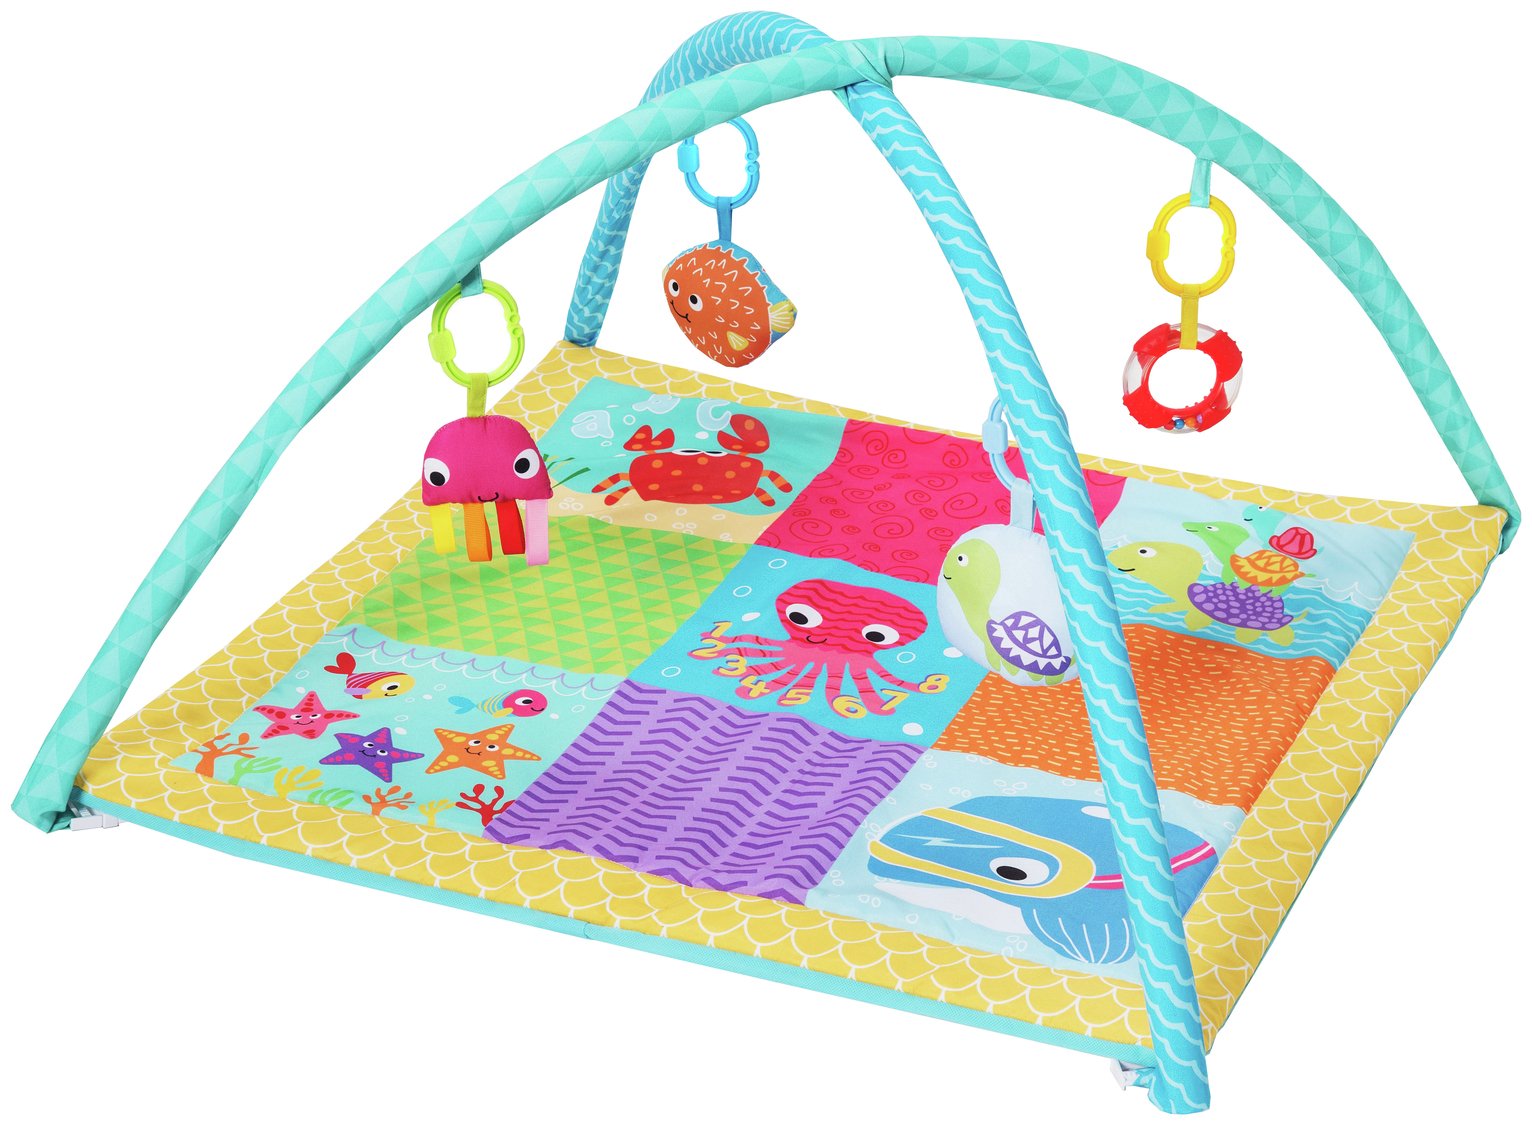 Chad Valley Baby Bright Ocean Play Gym